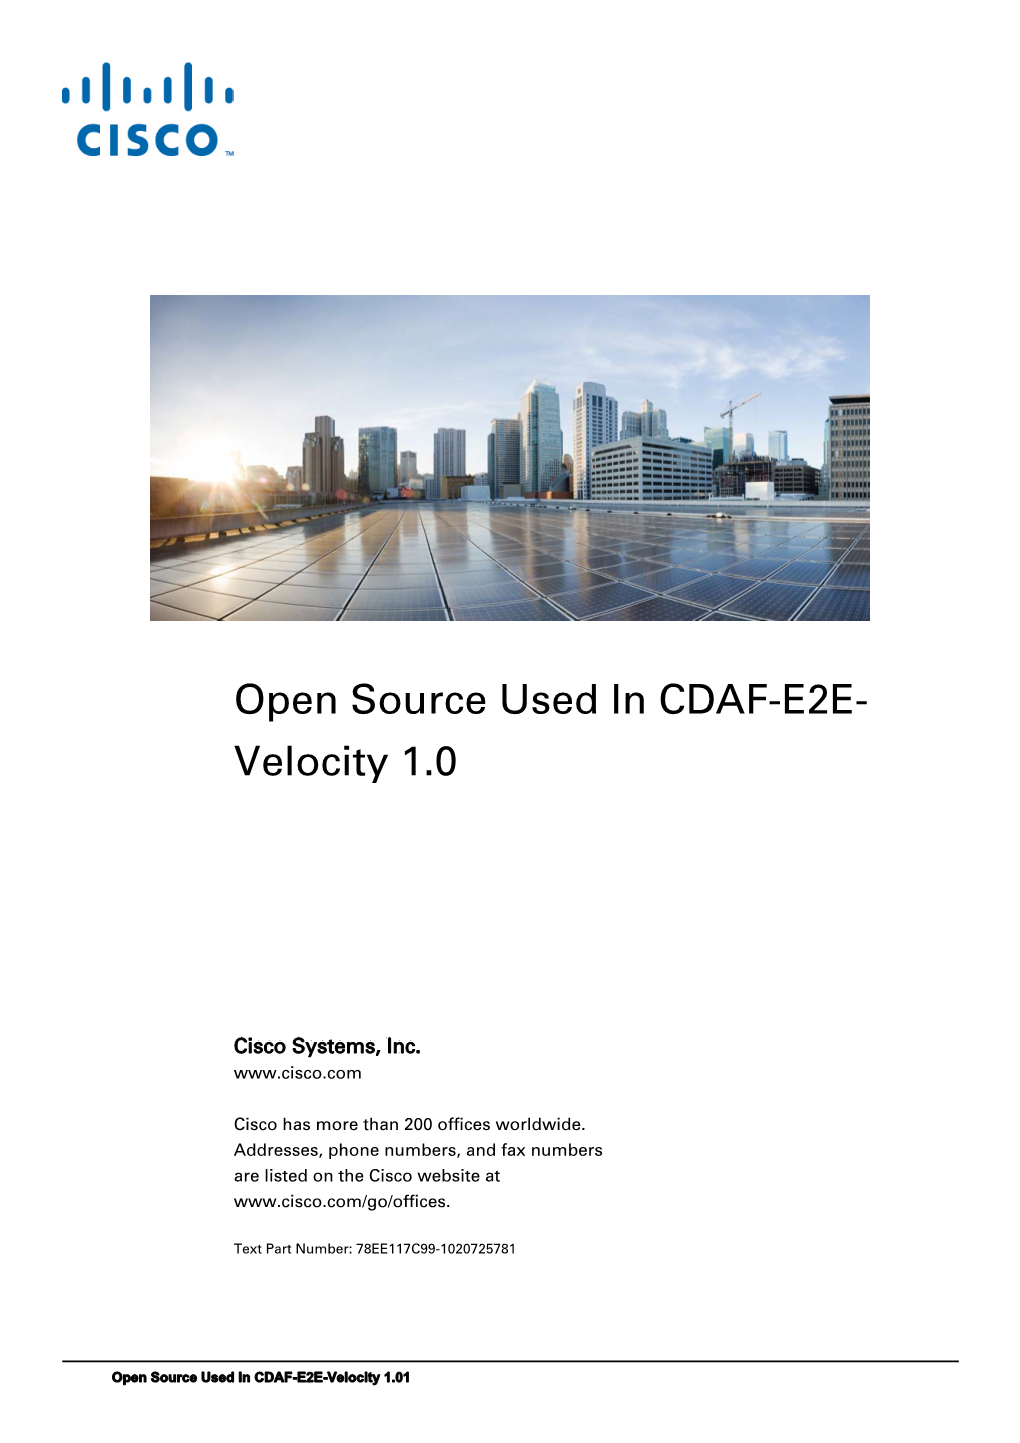 Open Source Used in CDAF-E2E-Velocity 1.01 This Document Contains Licenses and Notices for Open Source Software Used in This Product